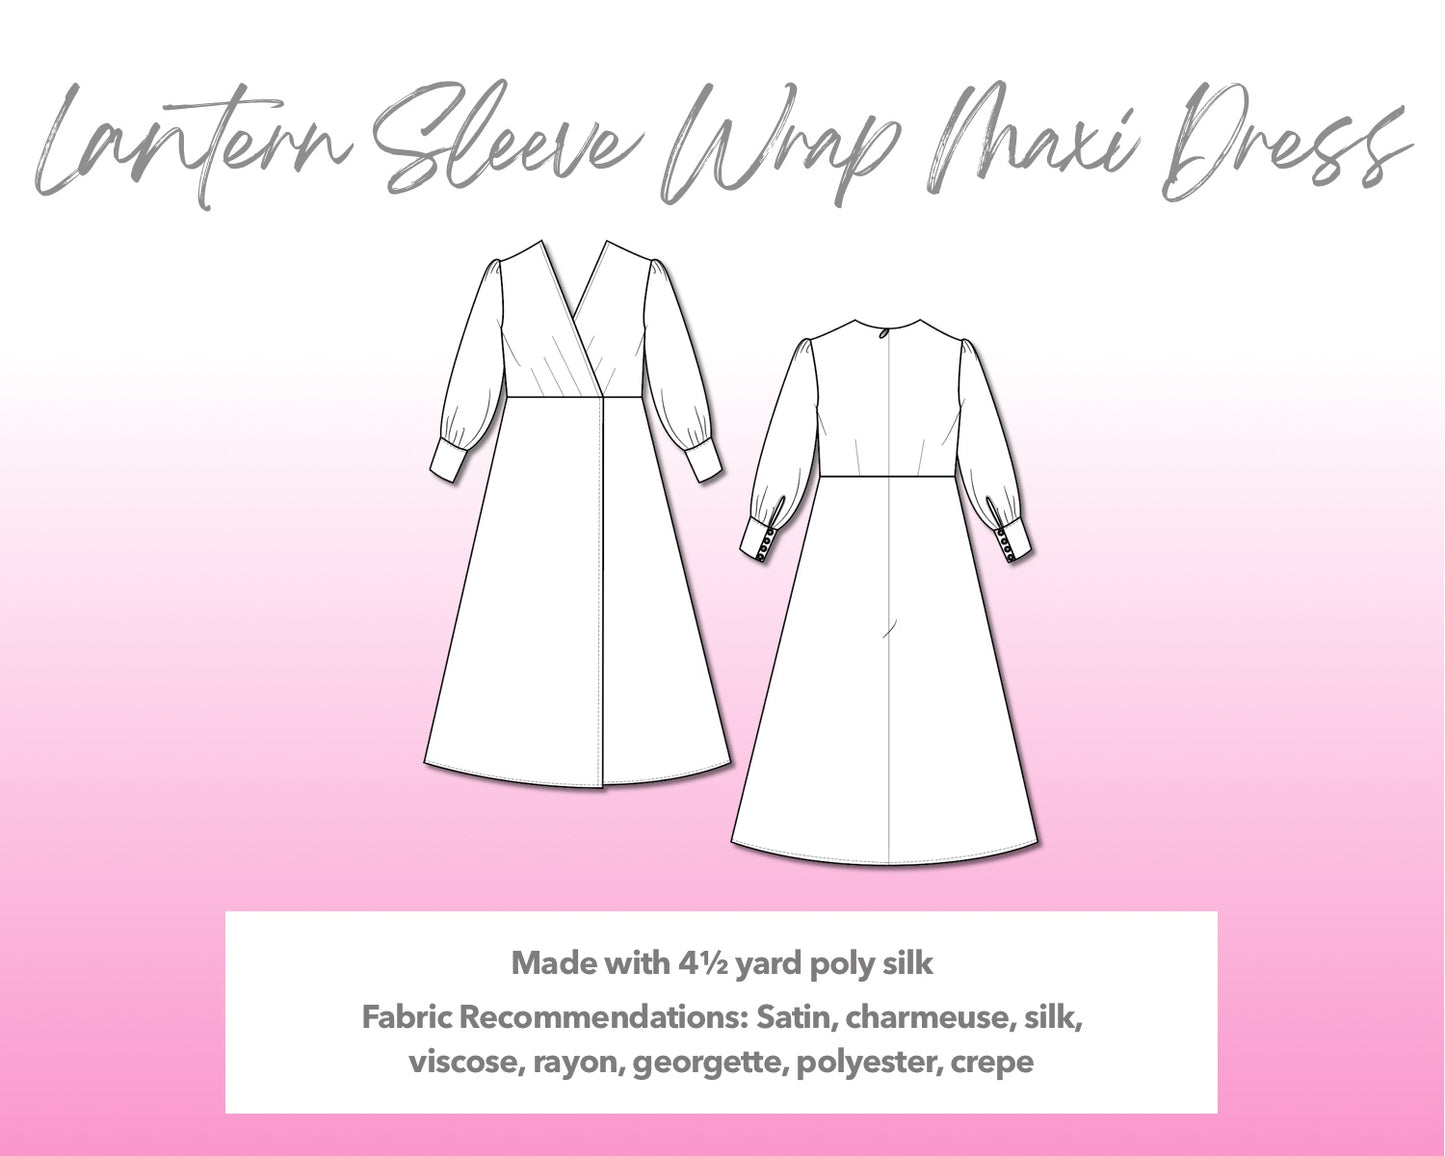 Illustration and detailed description for Lantern Sleeve Wrap Maxi Dress sewing pattern.